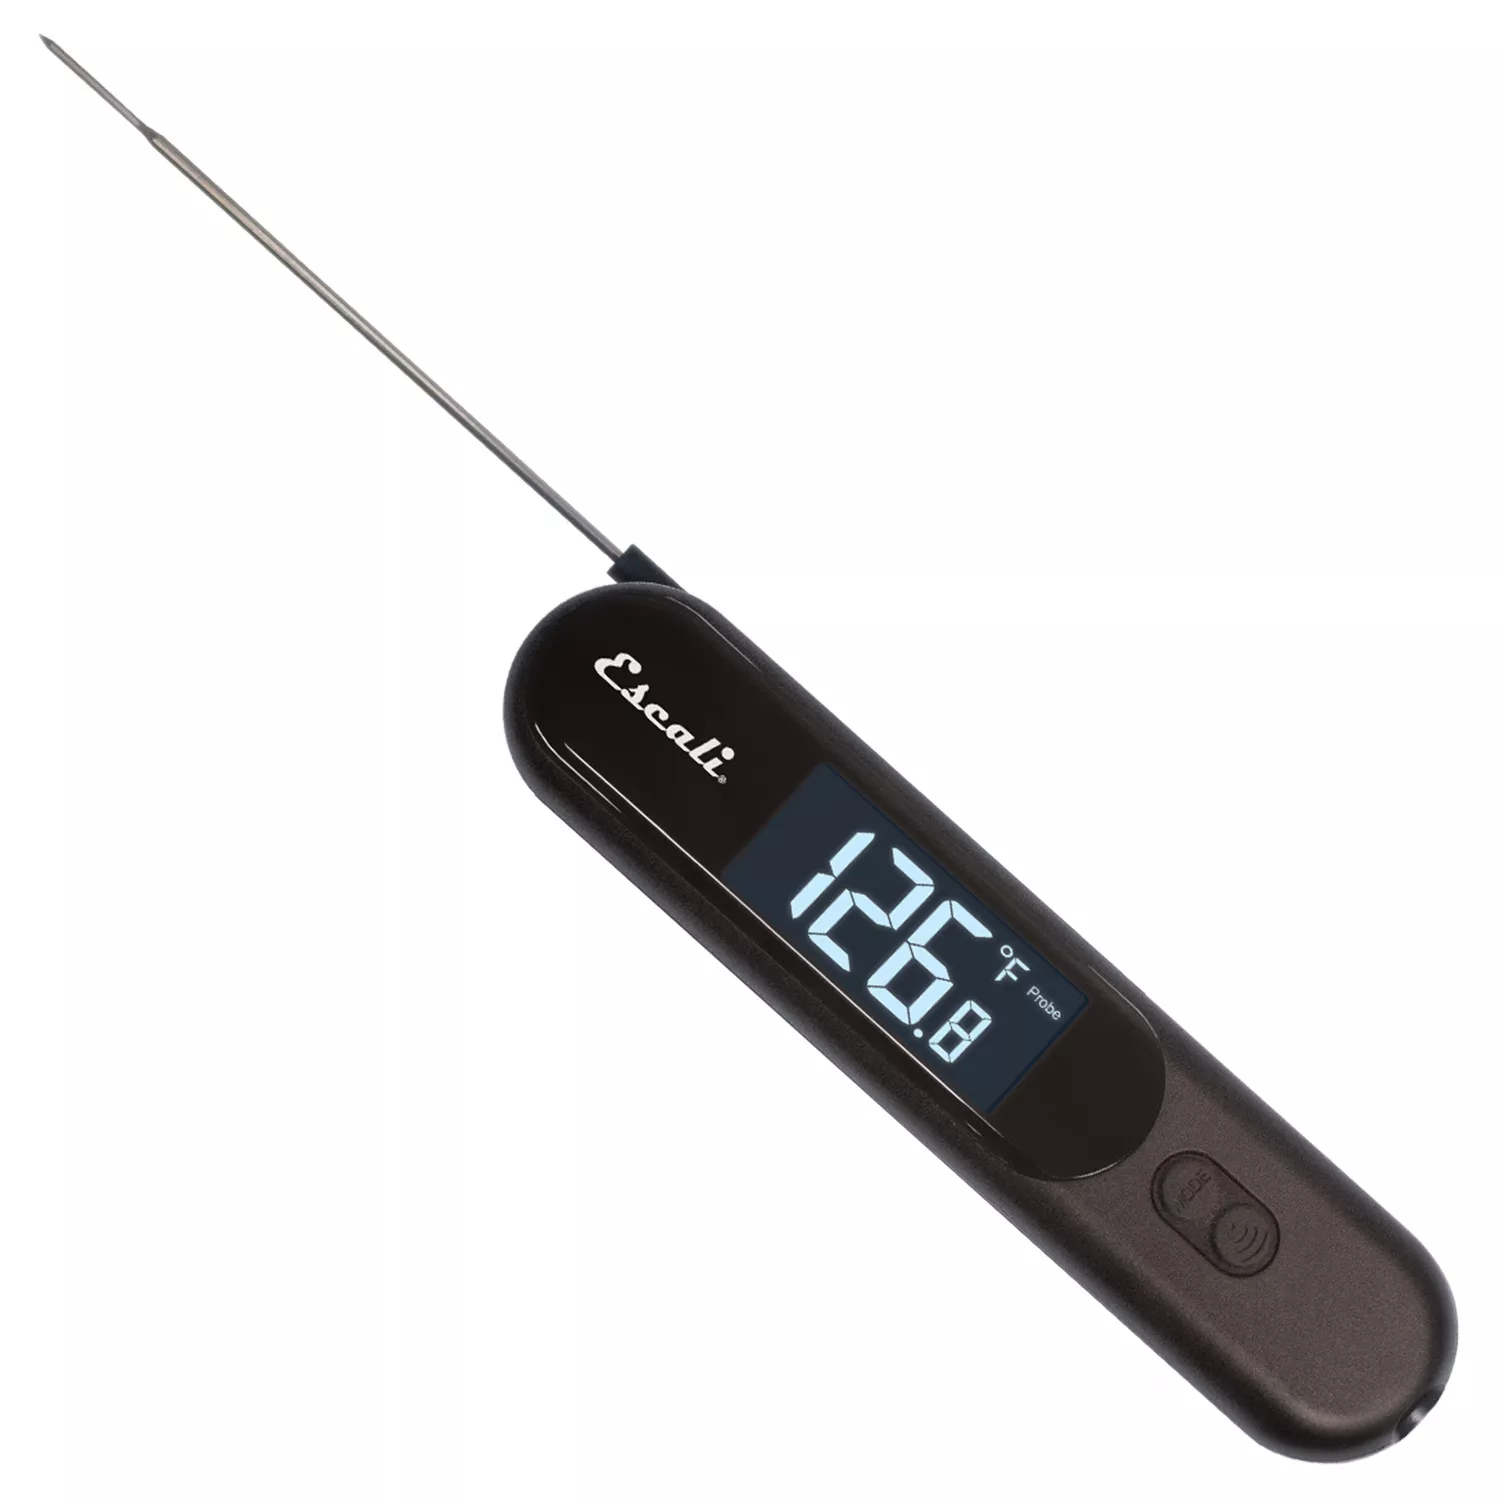 Escali DH7 Infrared Surface Folding Digital Thermometer